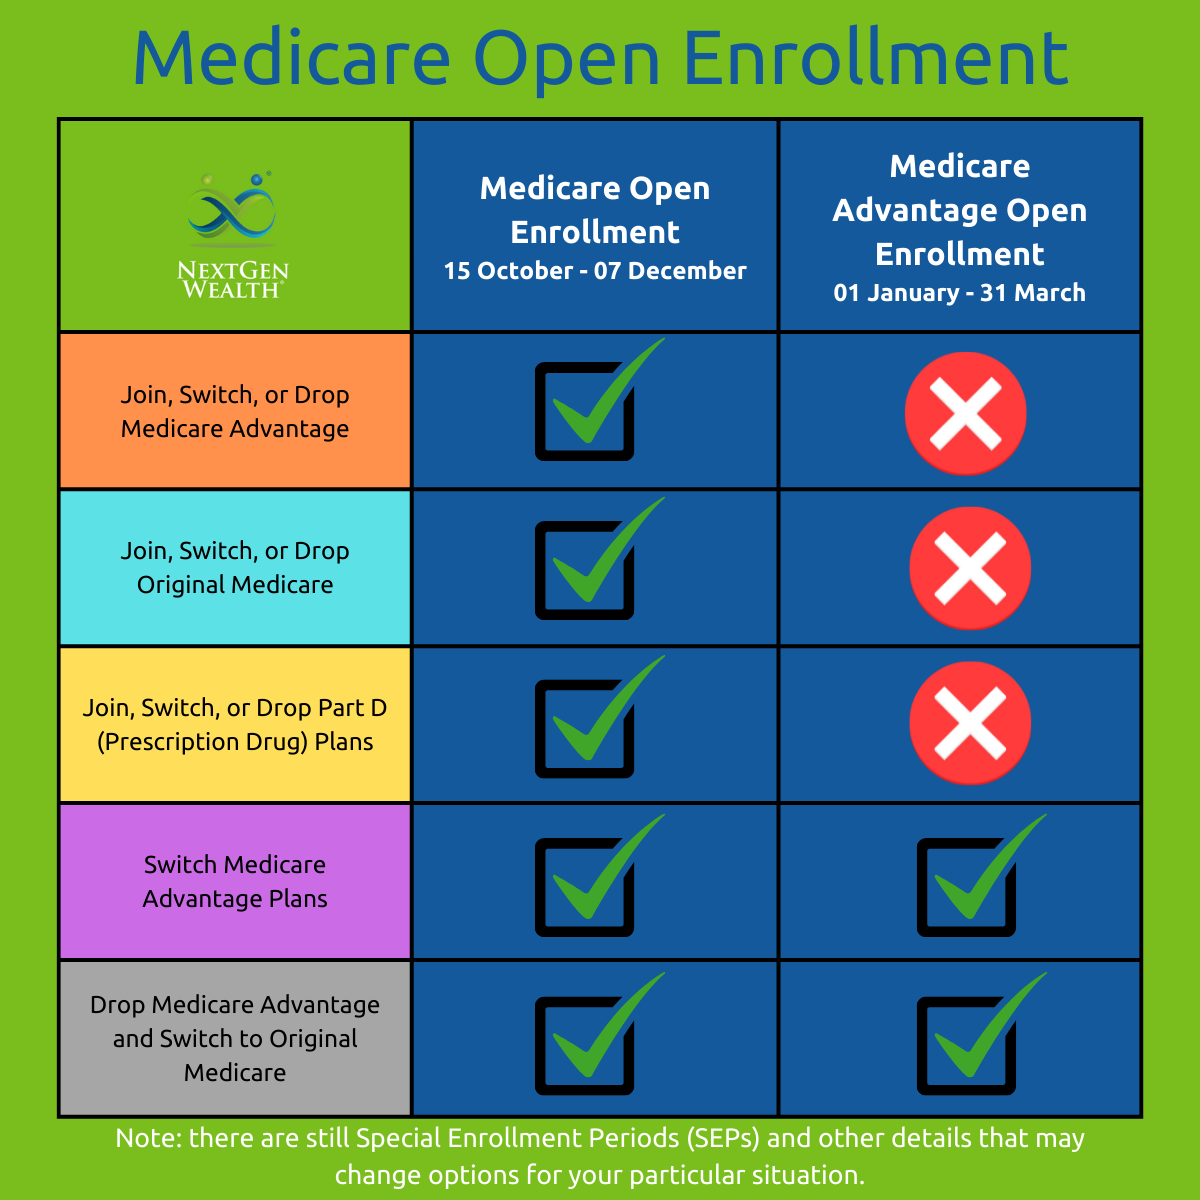 Top 5 Things You Need to Know About Medicare Open Enrollment